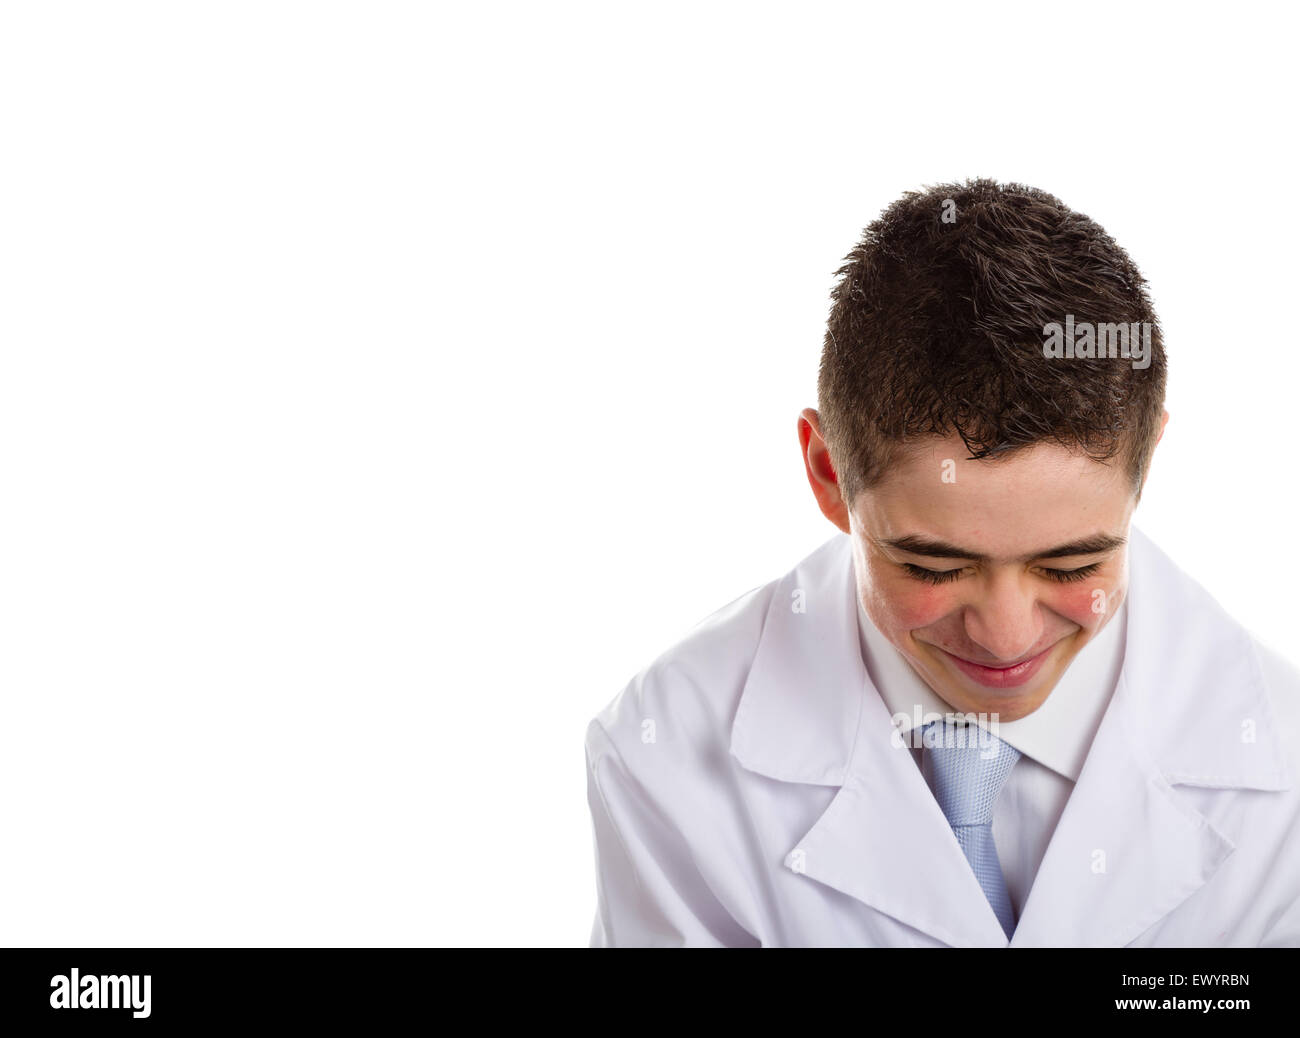 A boy doctor in white coat and blue tie helps to feel medicine more friendly: he is smiling. His acne skin has not ben retouched Stock Photo